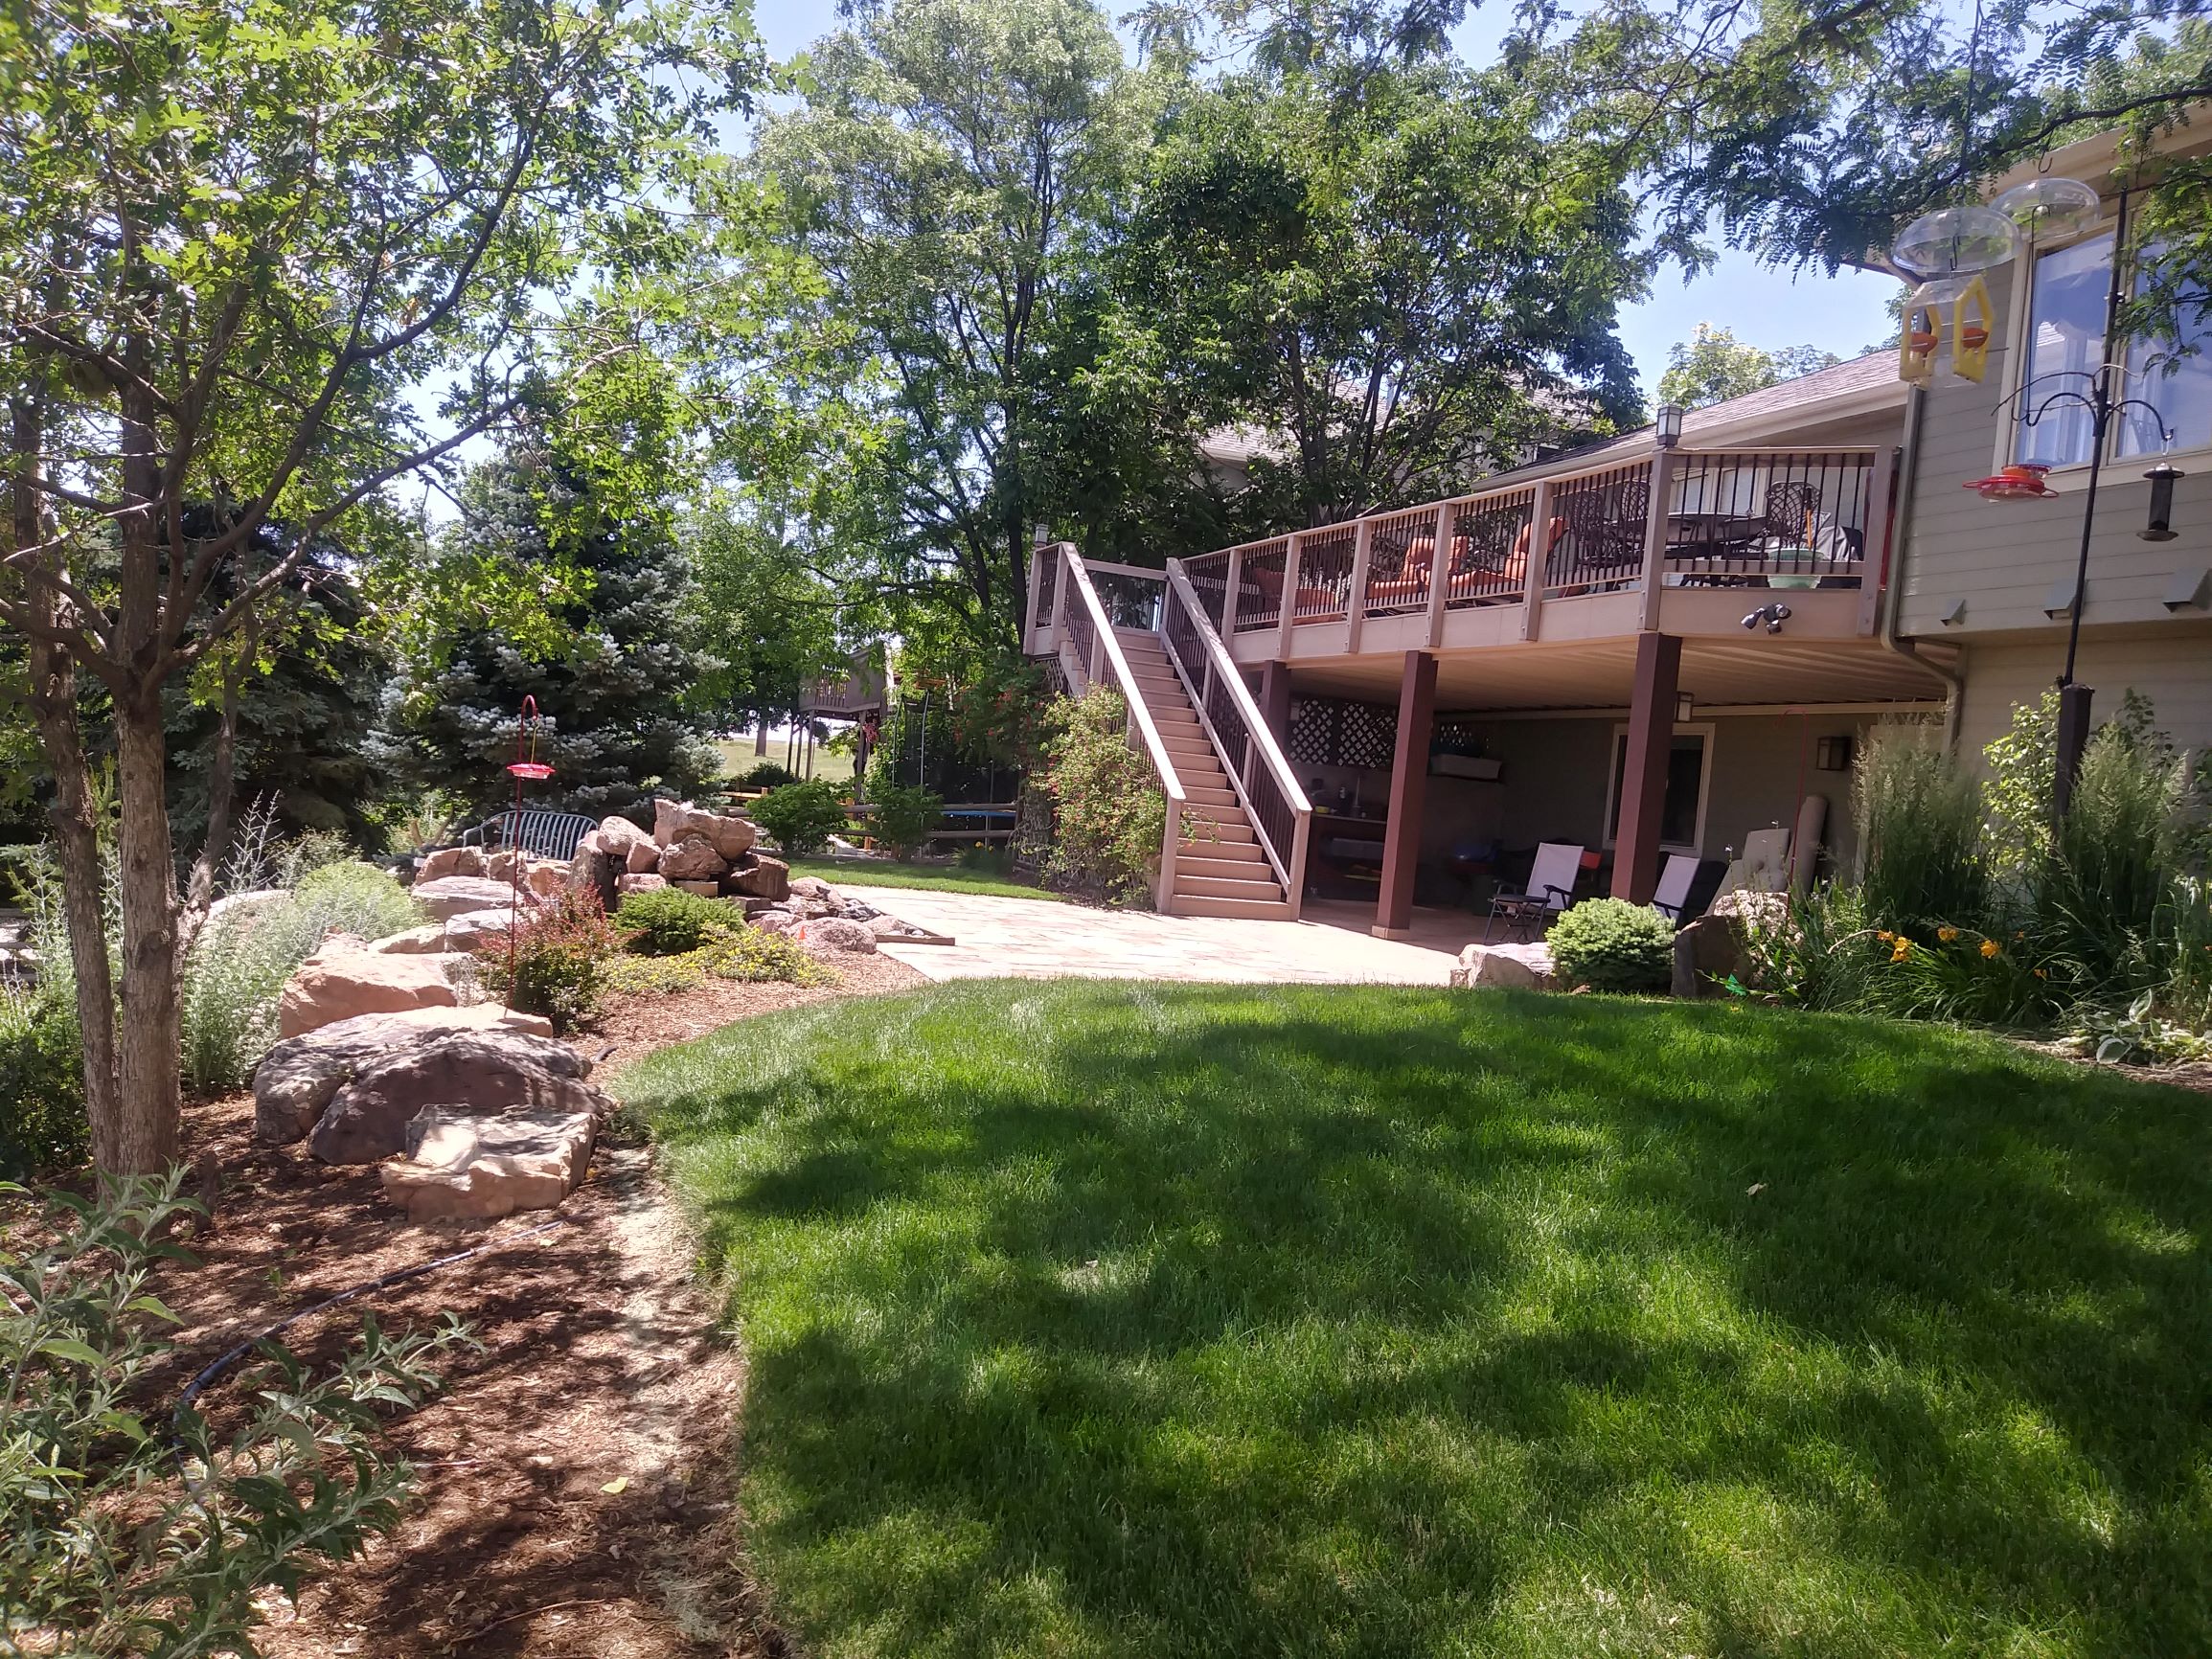 Second story deck leading to flat stone patio, bordered by large rocks, green grass, and many trees and bushes.